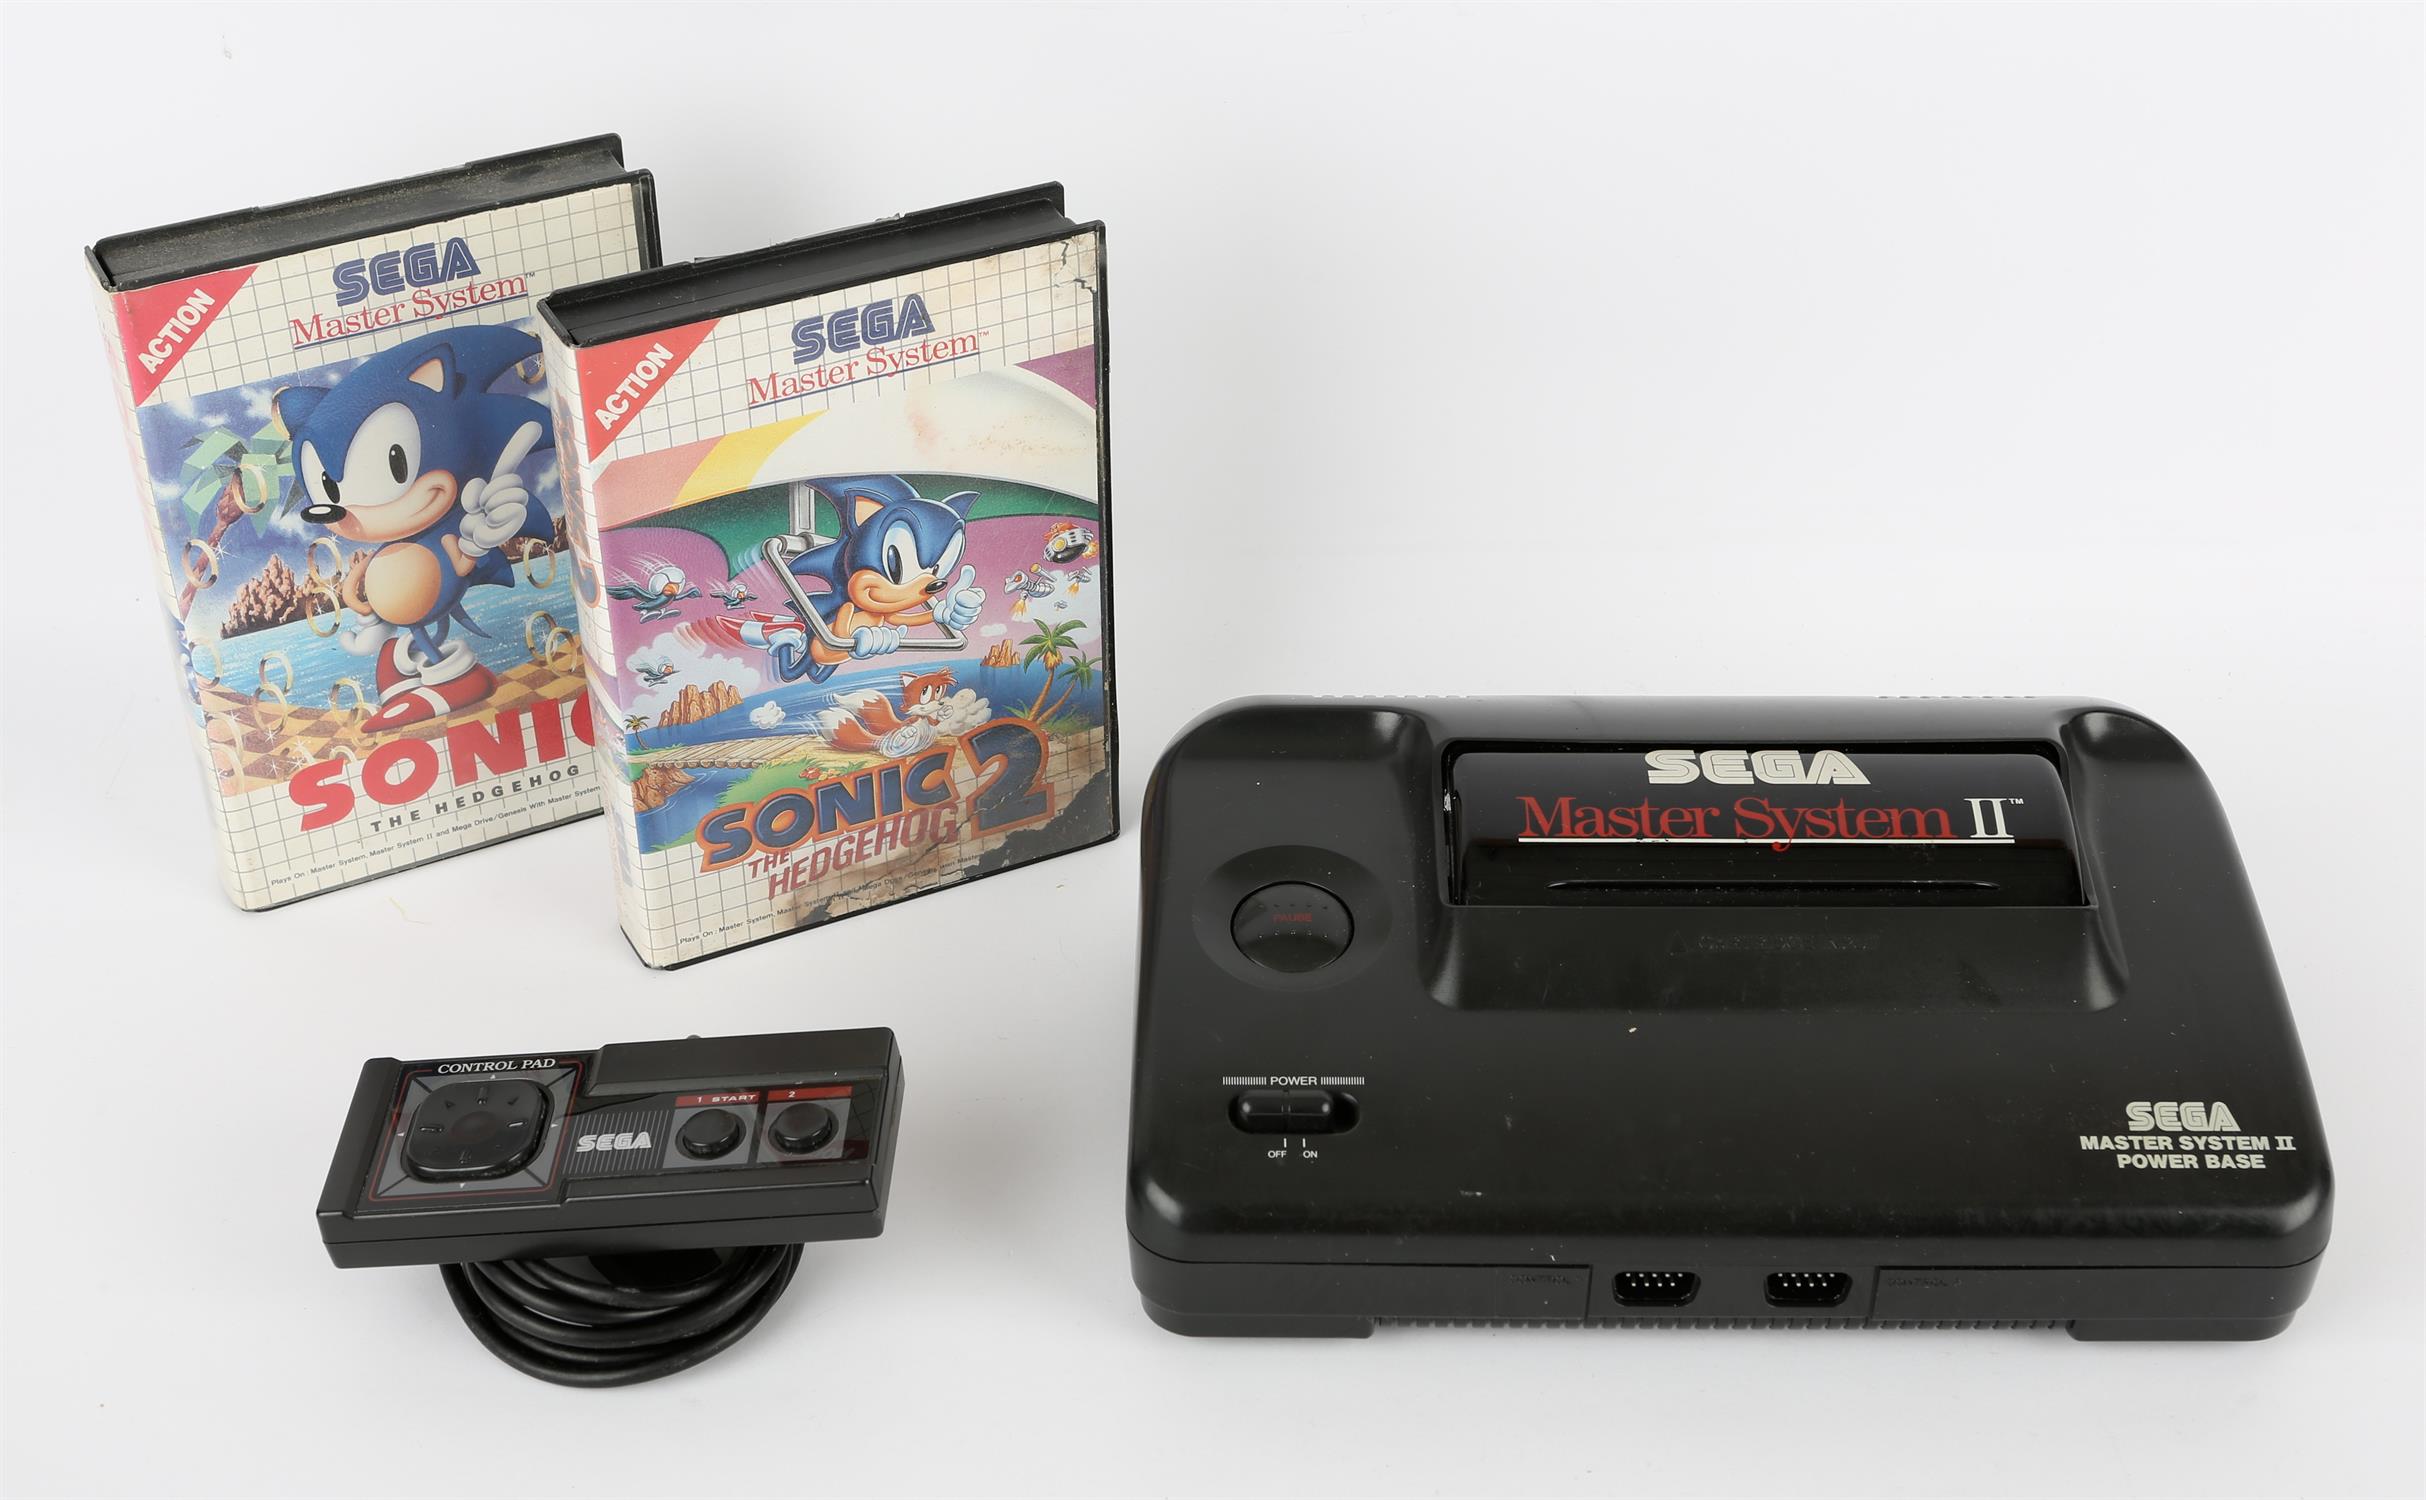 Sega Master System II Console with controller, power supply and 2 boxed games Games include: Sonic